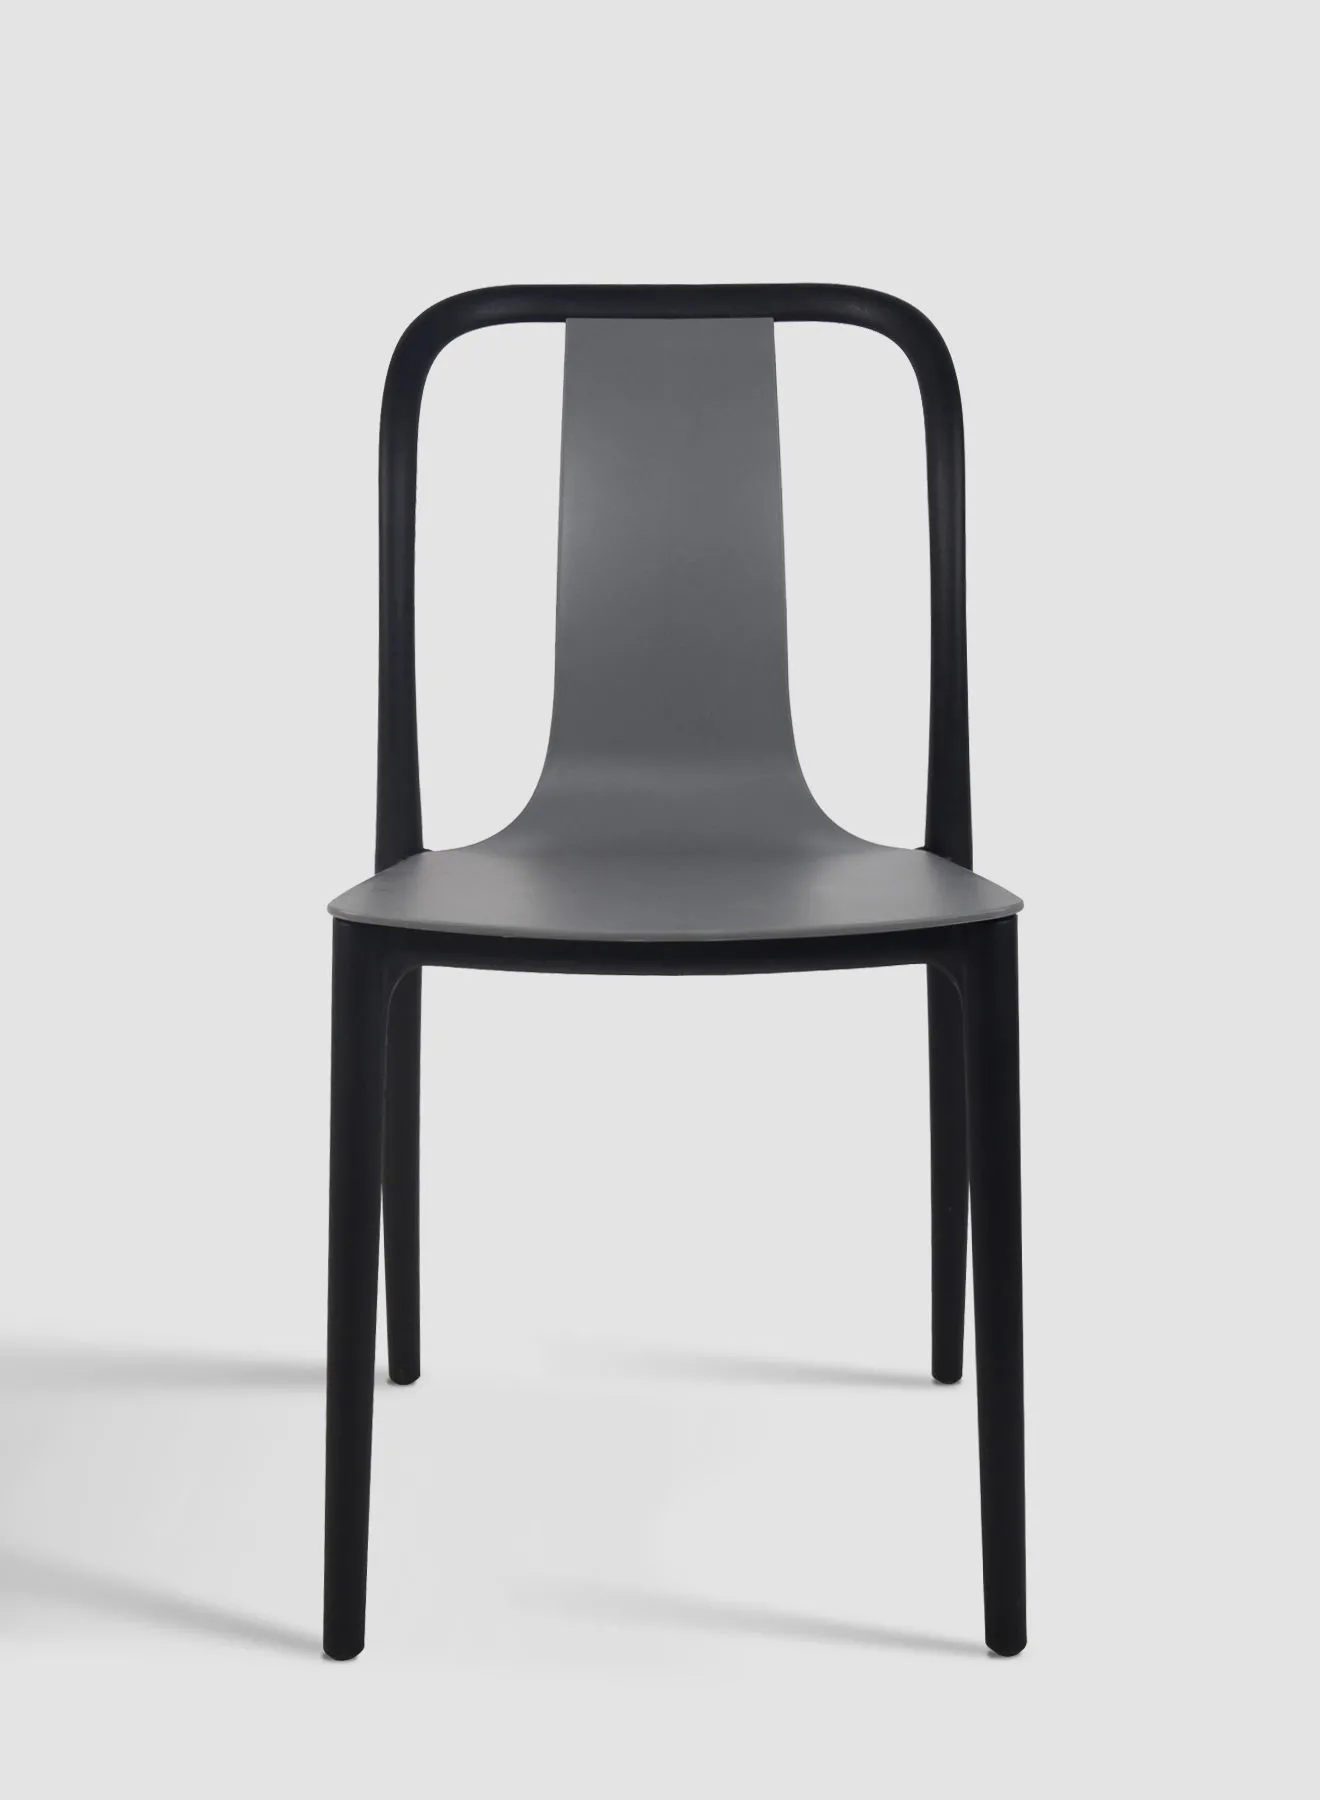 Switch Dining Chair In Grey Plastic Chair Size 55 X 48 X 89cm